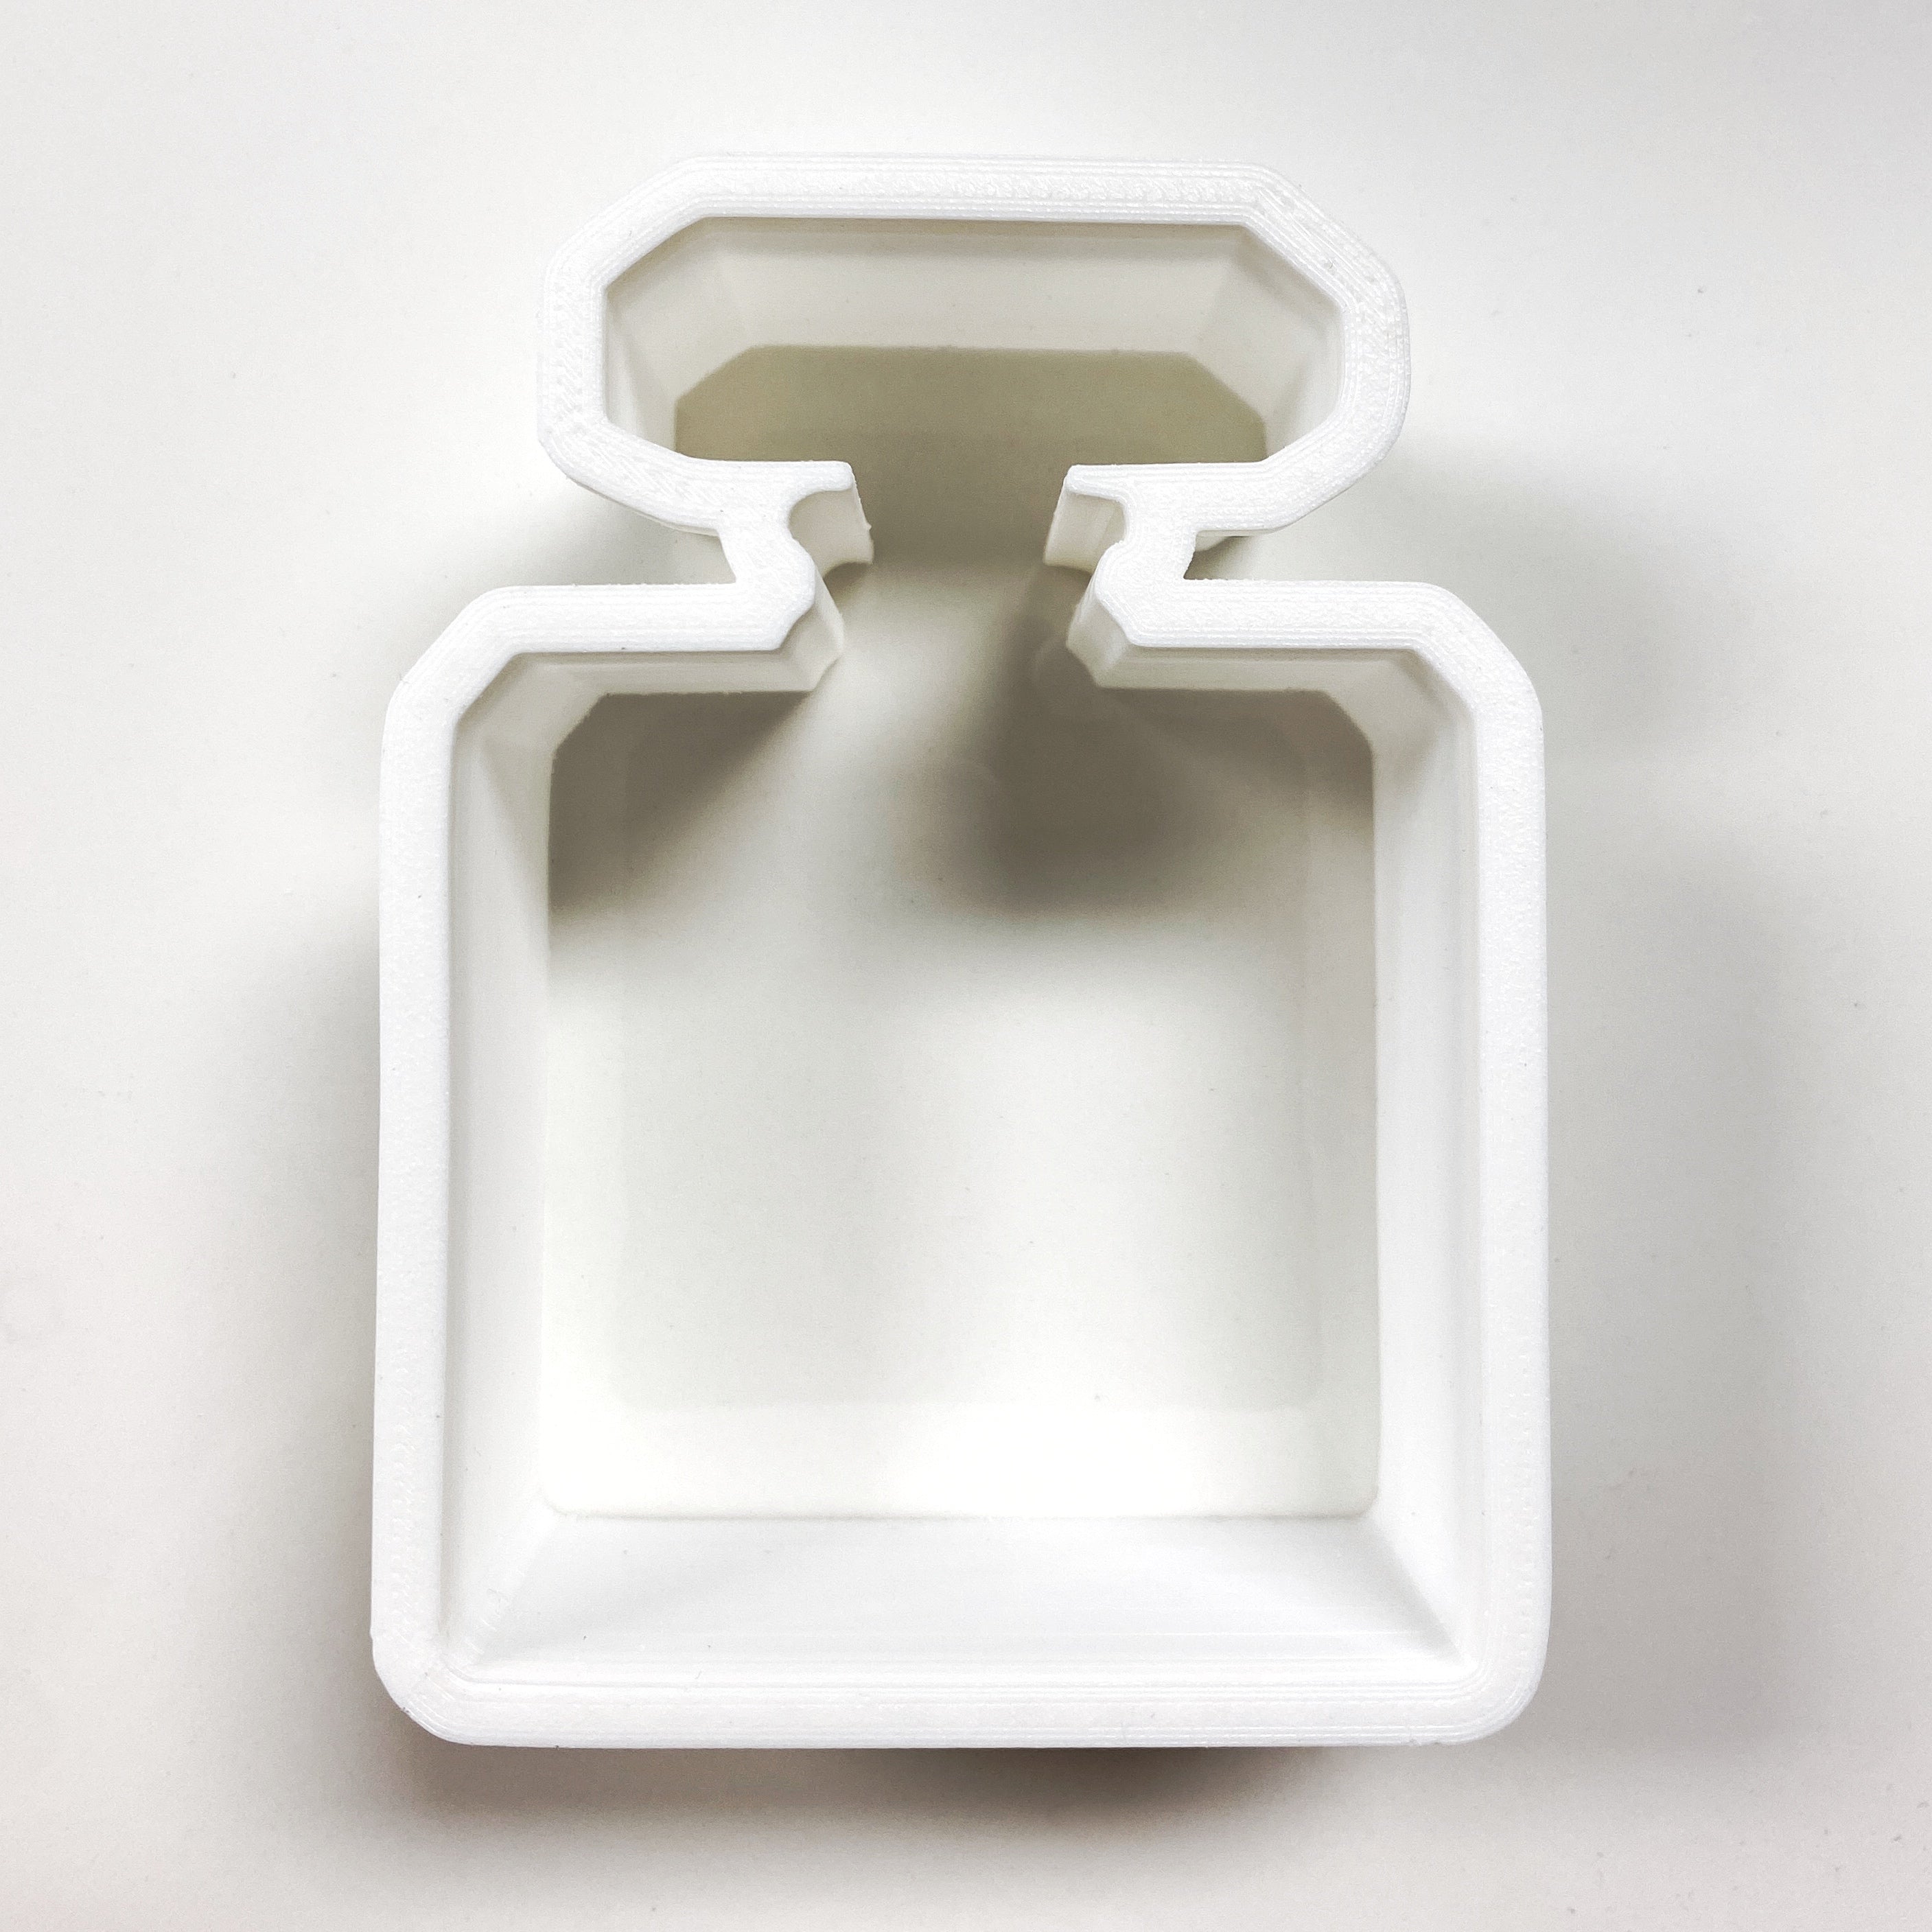 Chanel No.5-Style Perfume Bottle Cookie Cutter